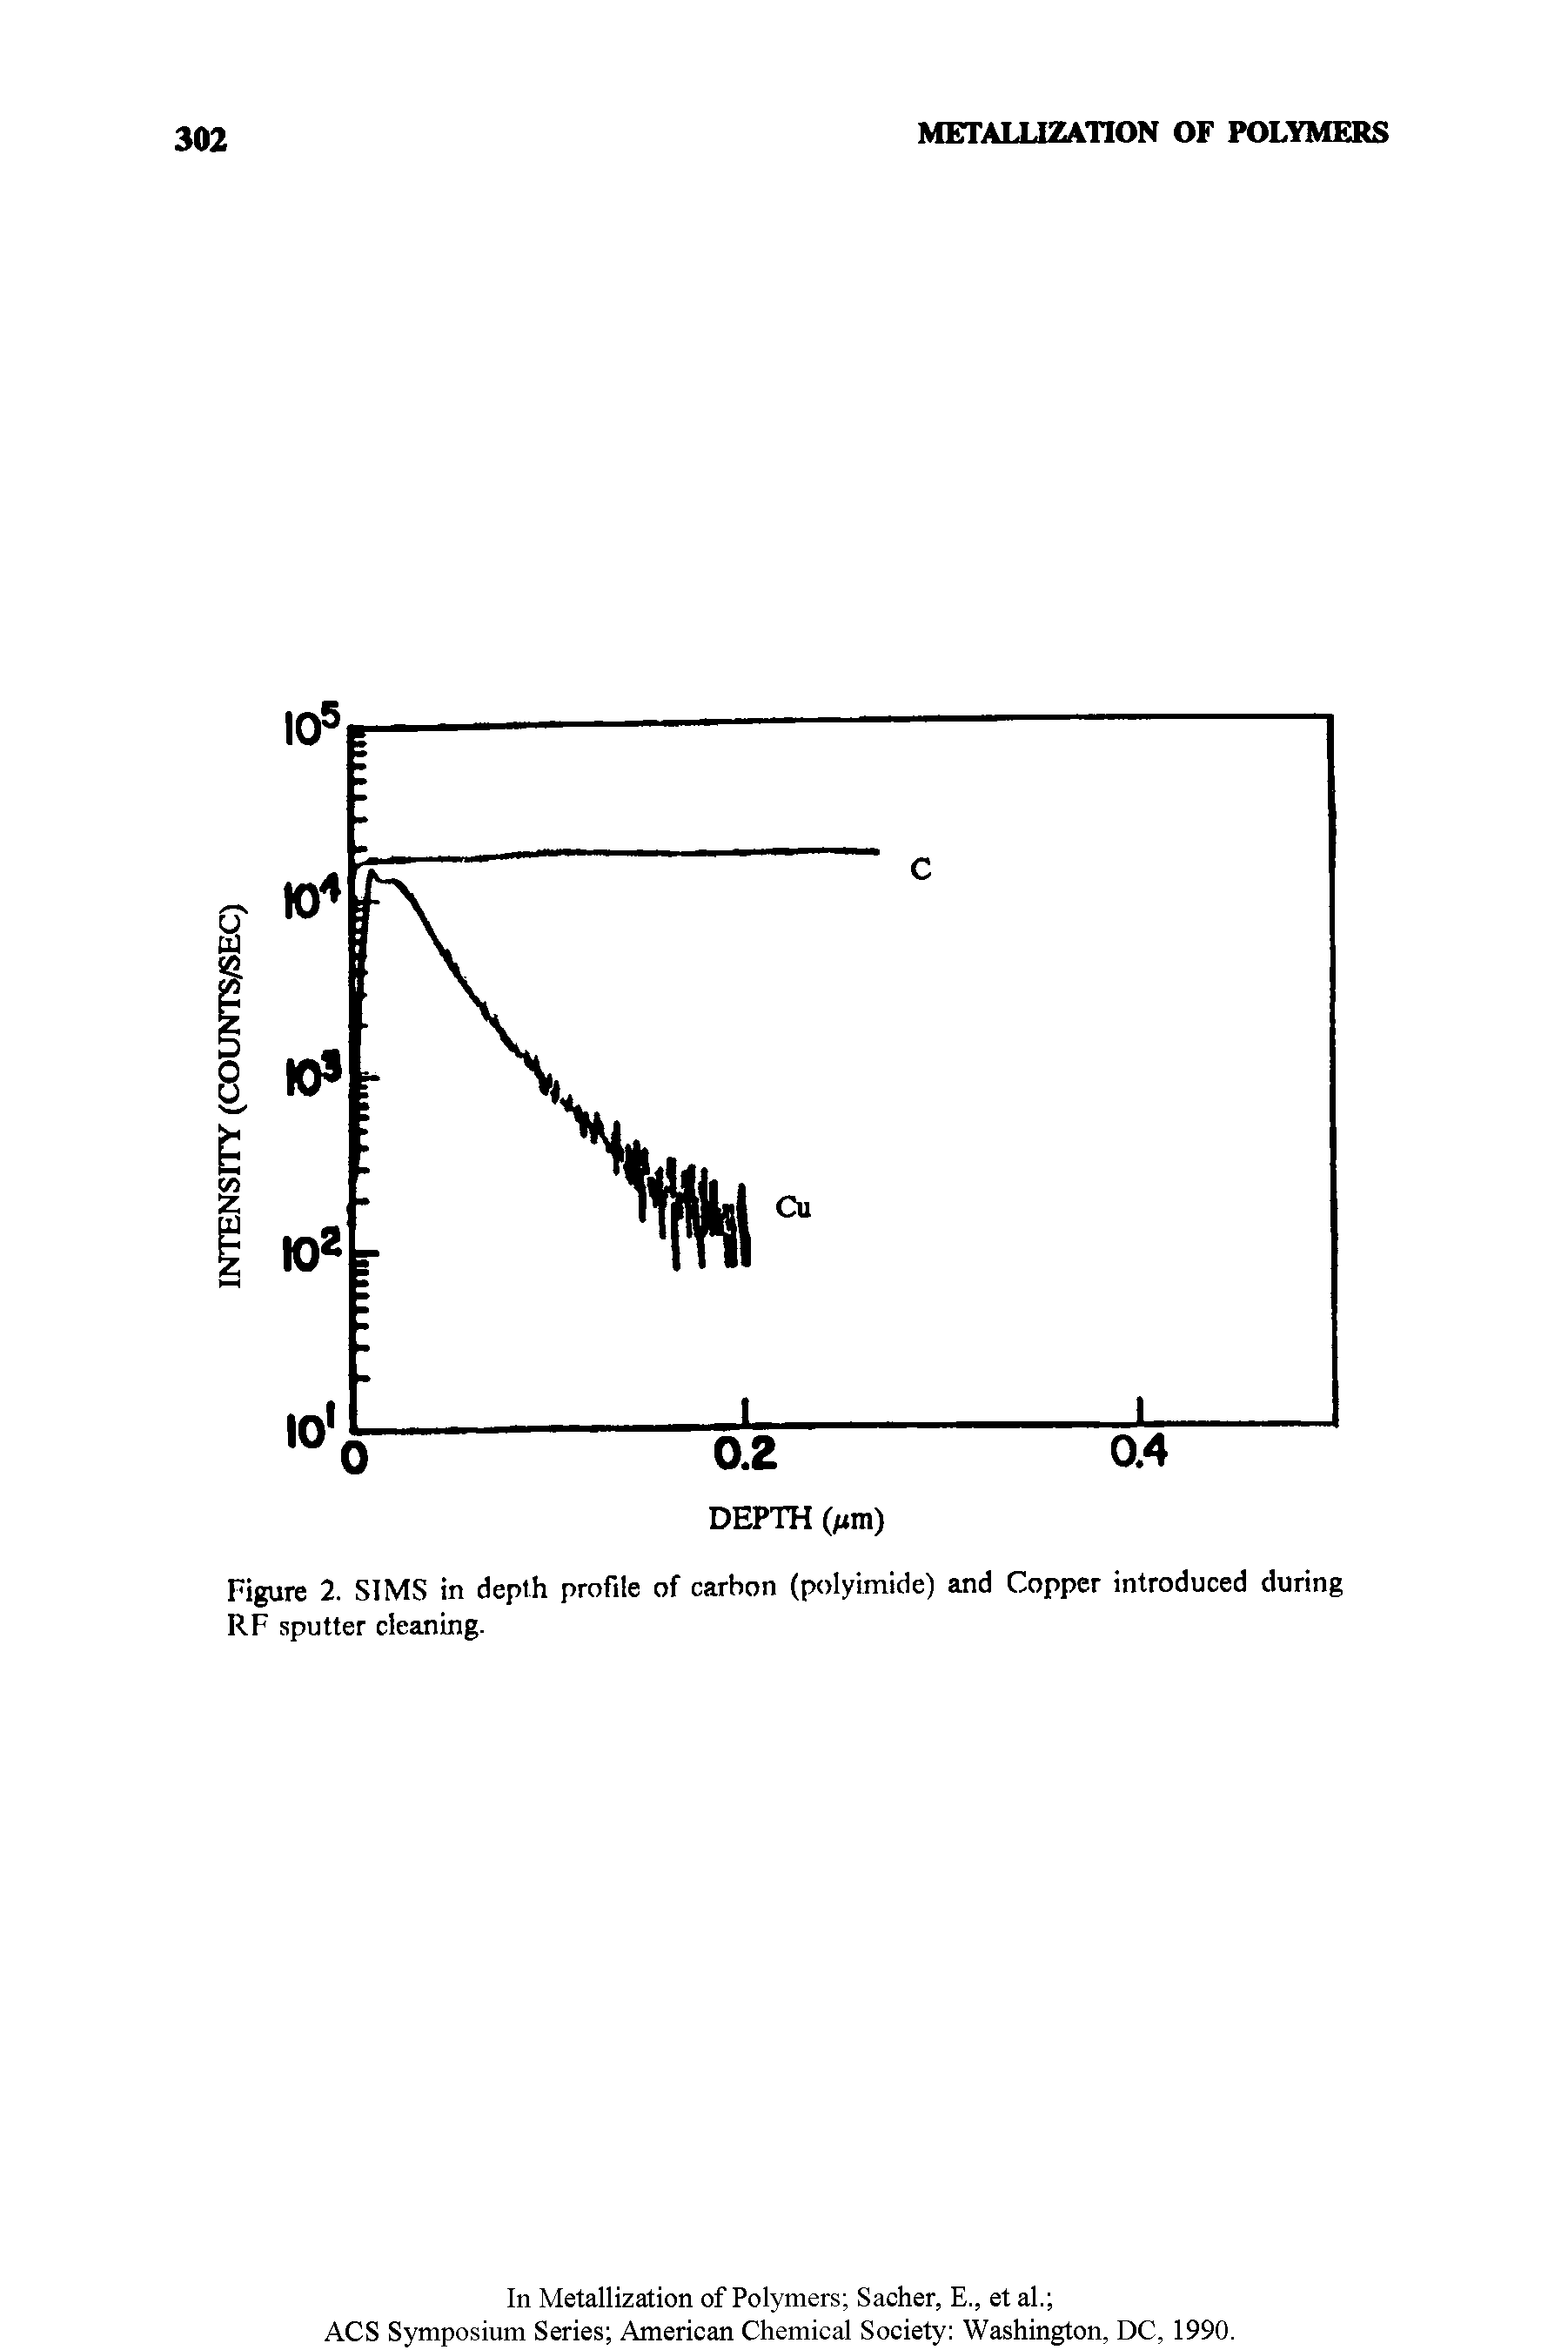 Figure 2. SIMS in depth profile of carbon (polyimide) and Copper introduced during RF sputter cleaning.